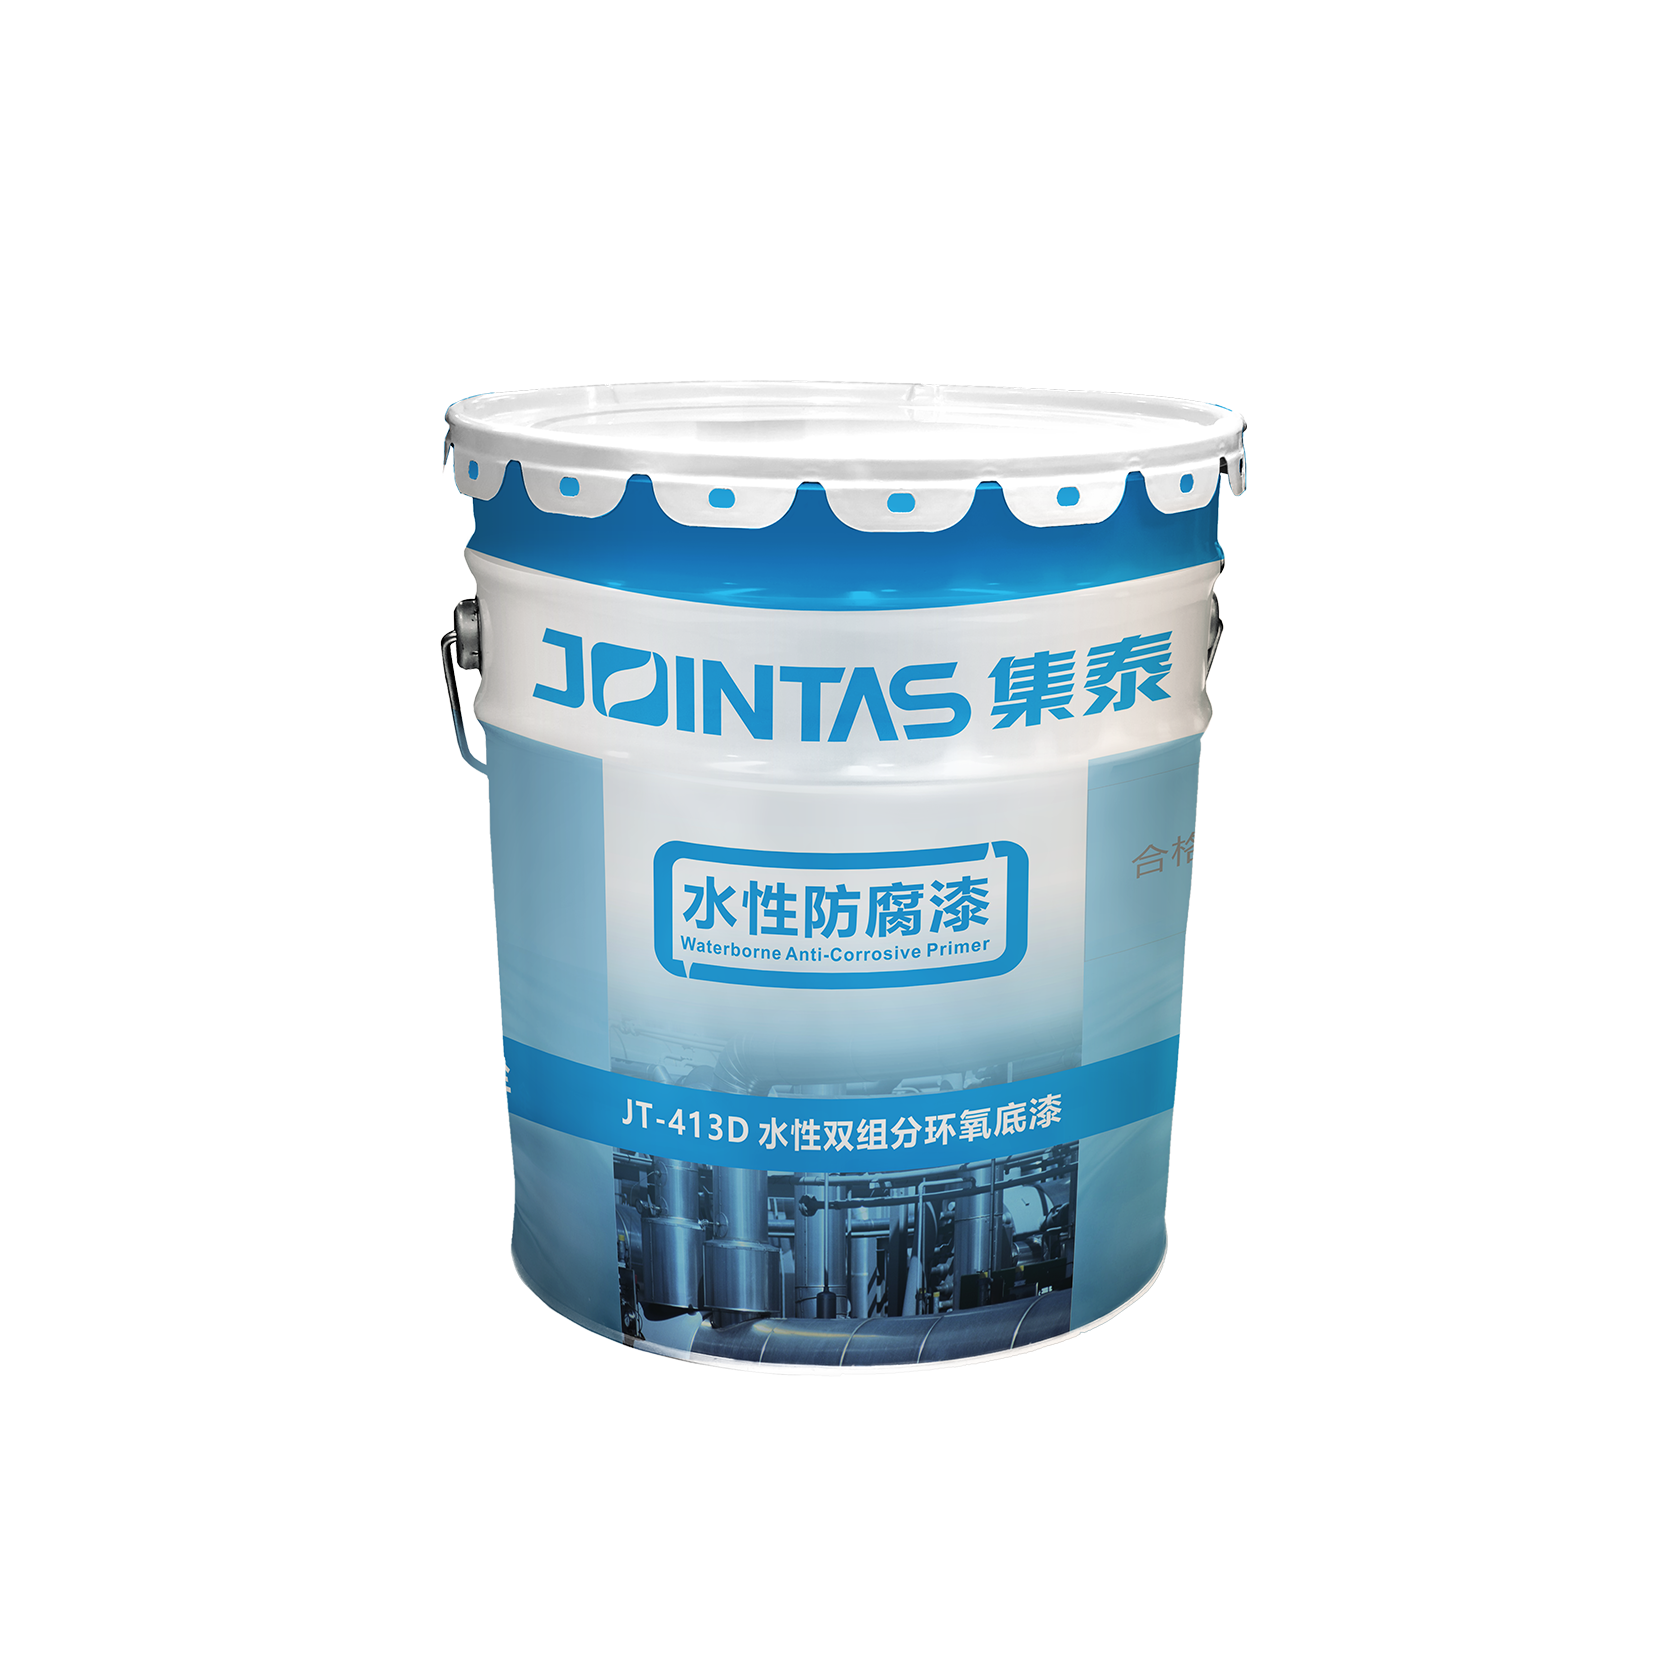 JT-413D Water-Based Two-component Epoxy  Primer paint